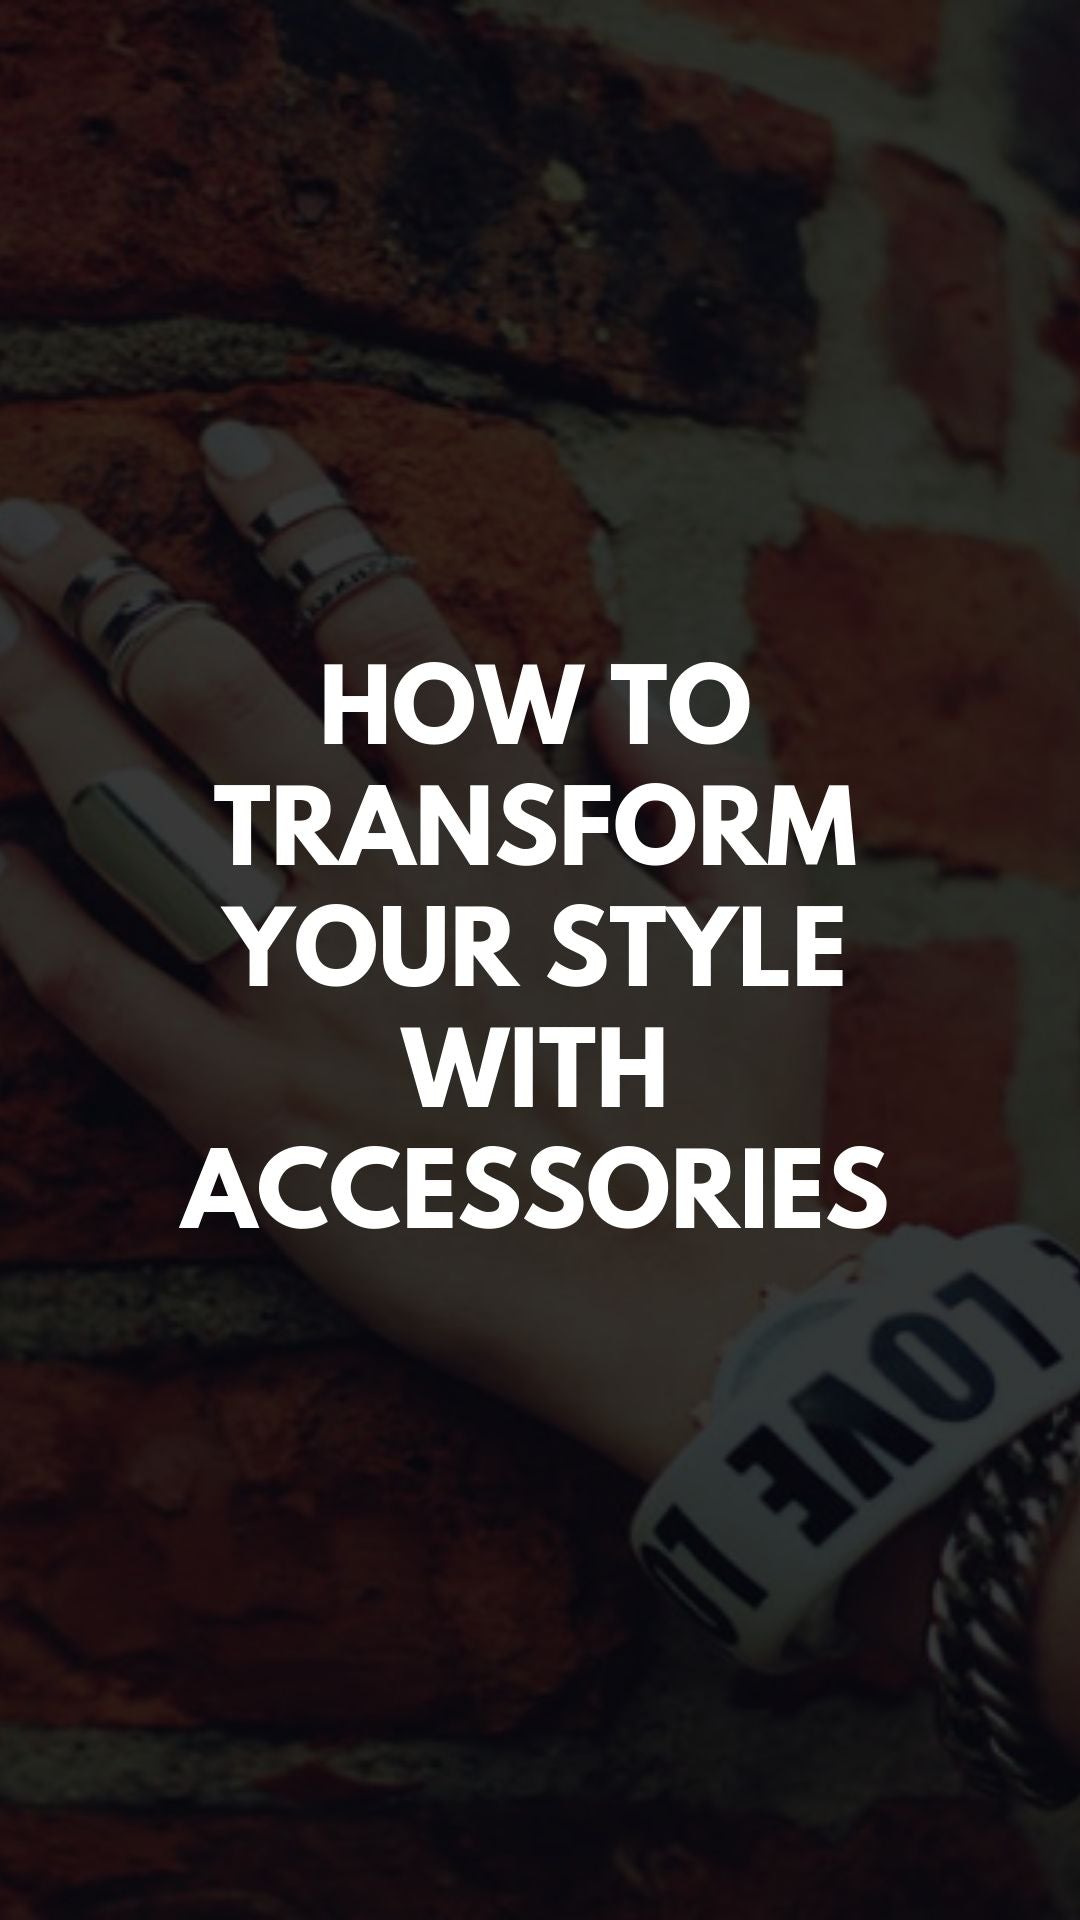 How to Transform Your Style with Accessories